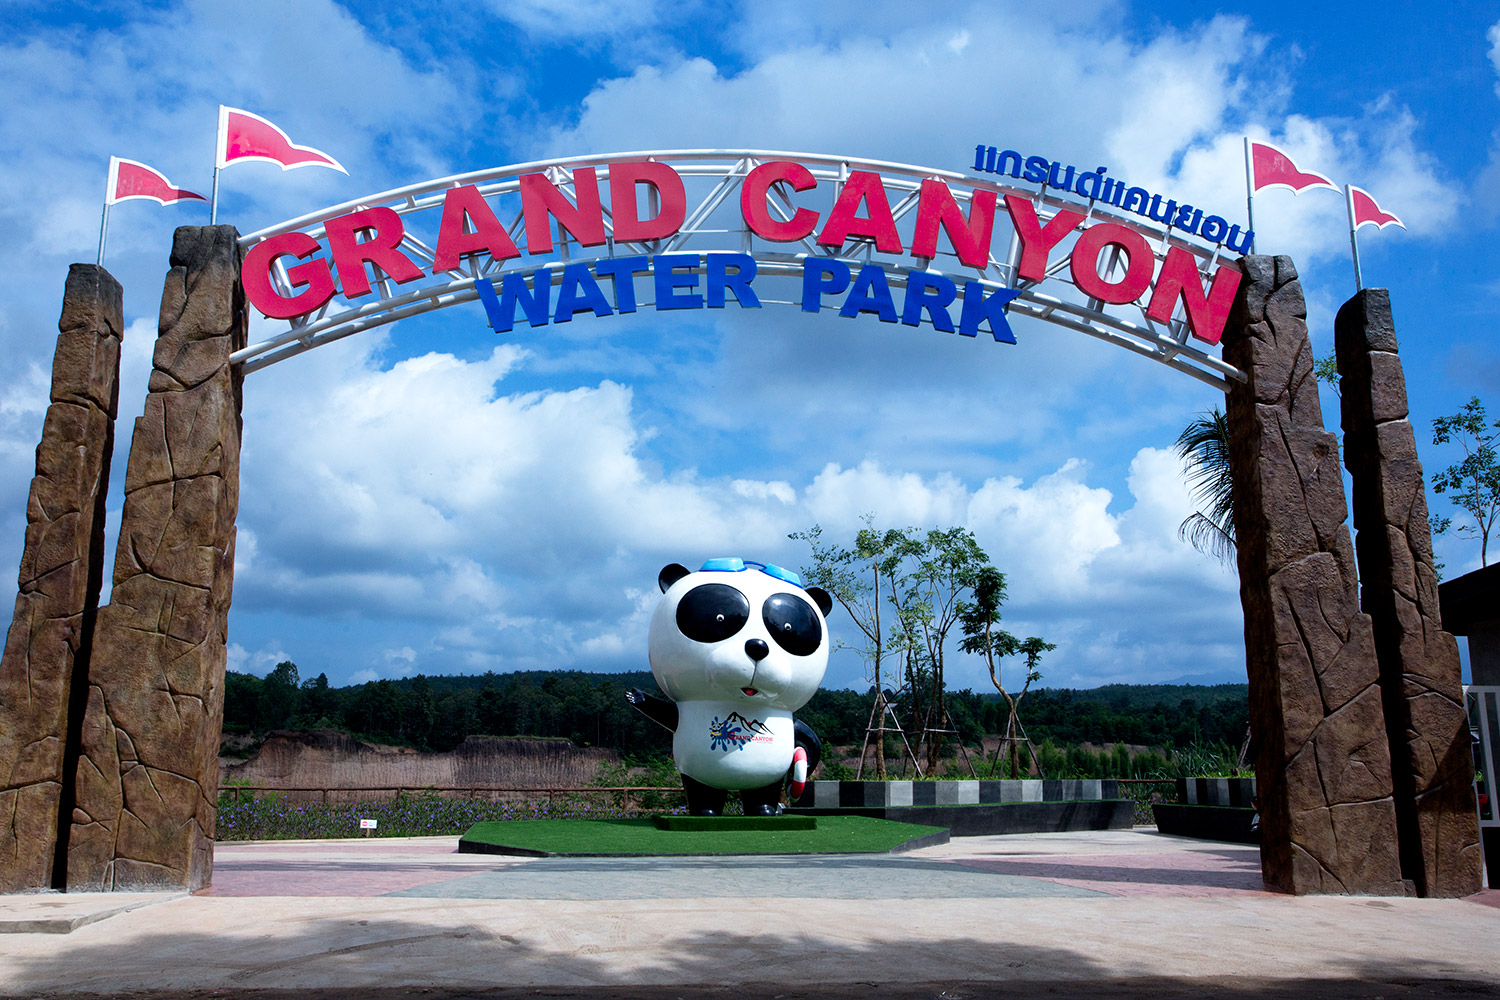 GRAND-CANYON-WATER-PARK-11